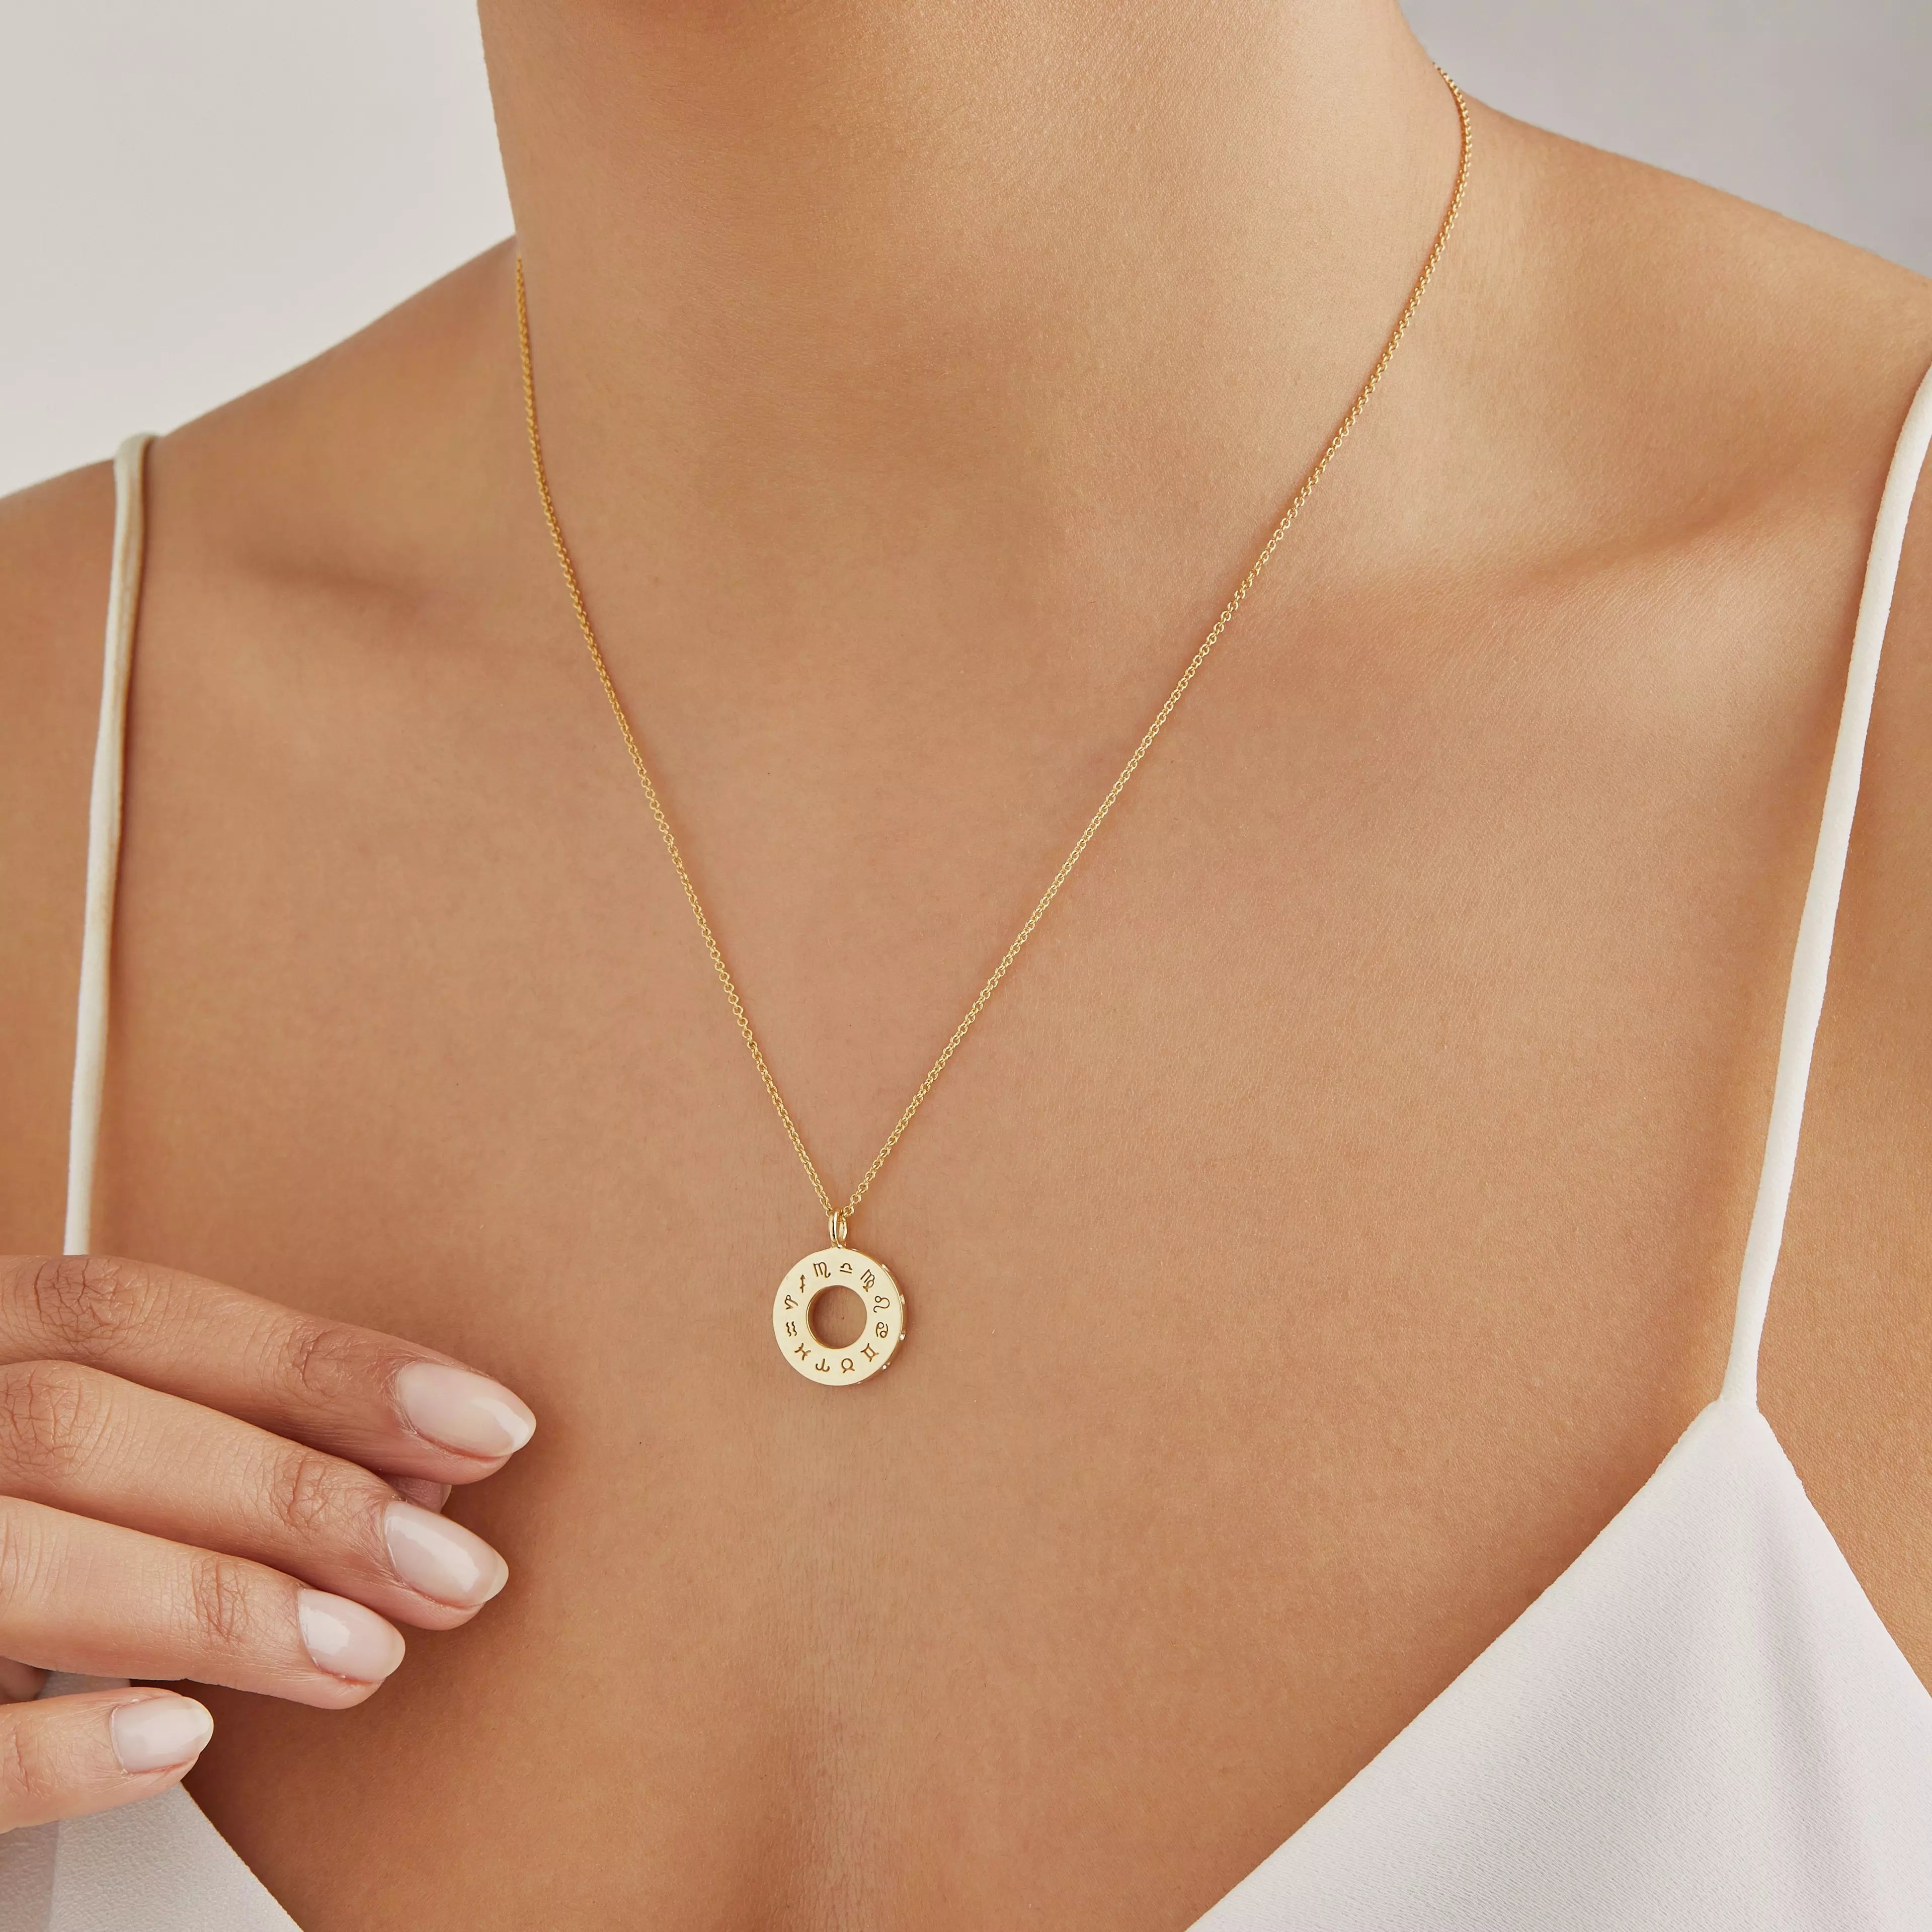 Gold zodiac birthstone necklace on a chest of a woman wearing a white strappy top